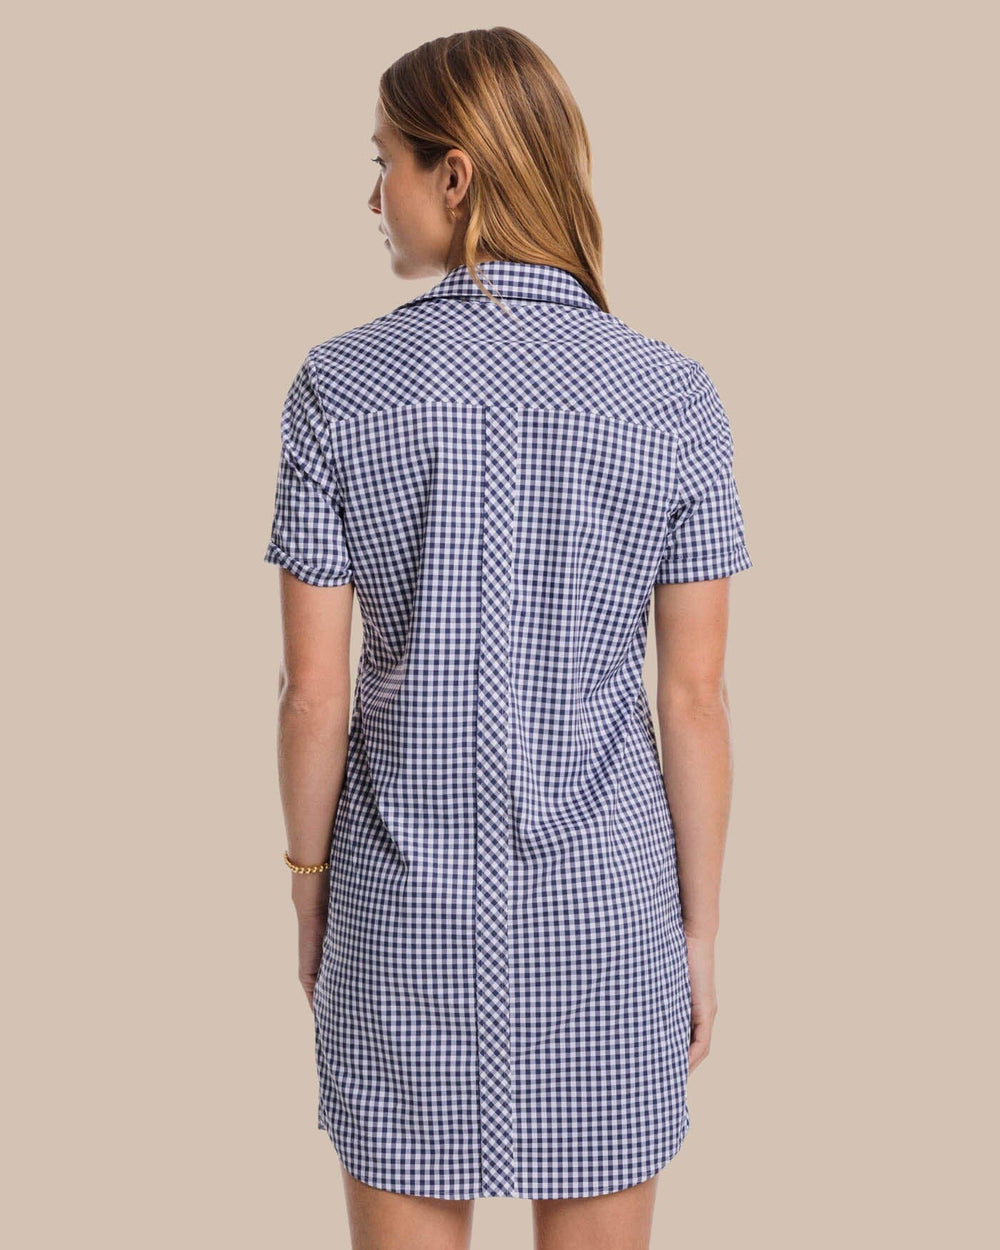 The back view of the Southern Tide Kamryn brrr°® Intercoastal Gingham Dress by Southern Tide - Nautical Navy